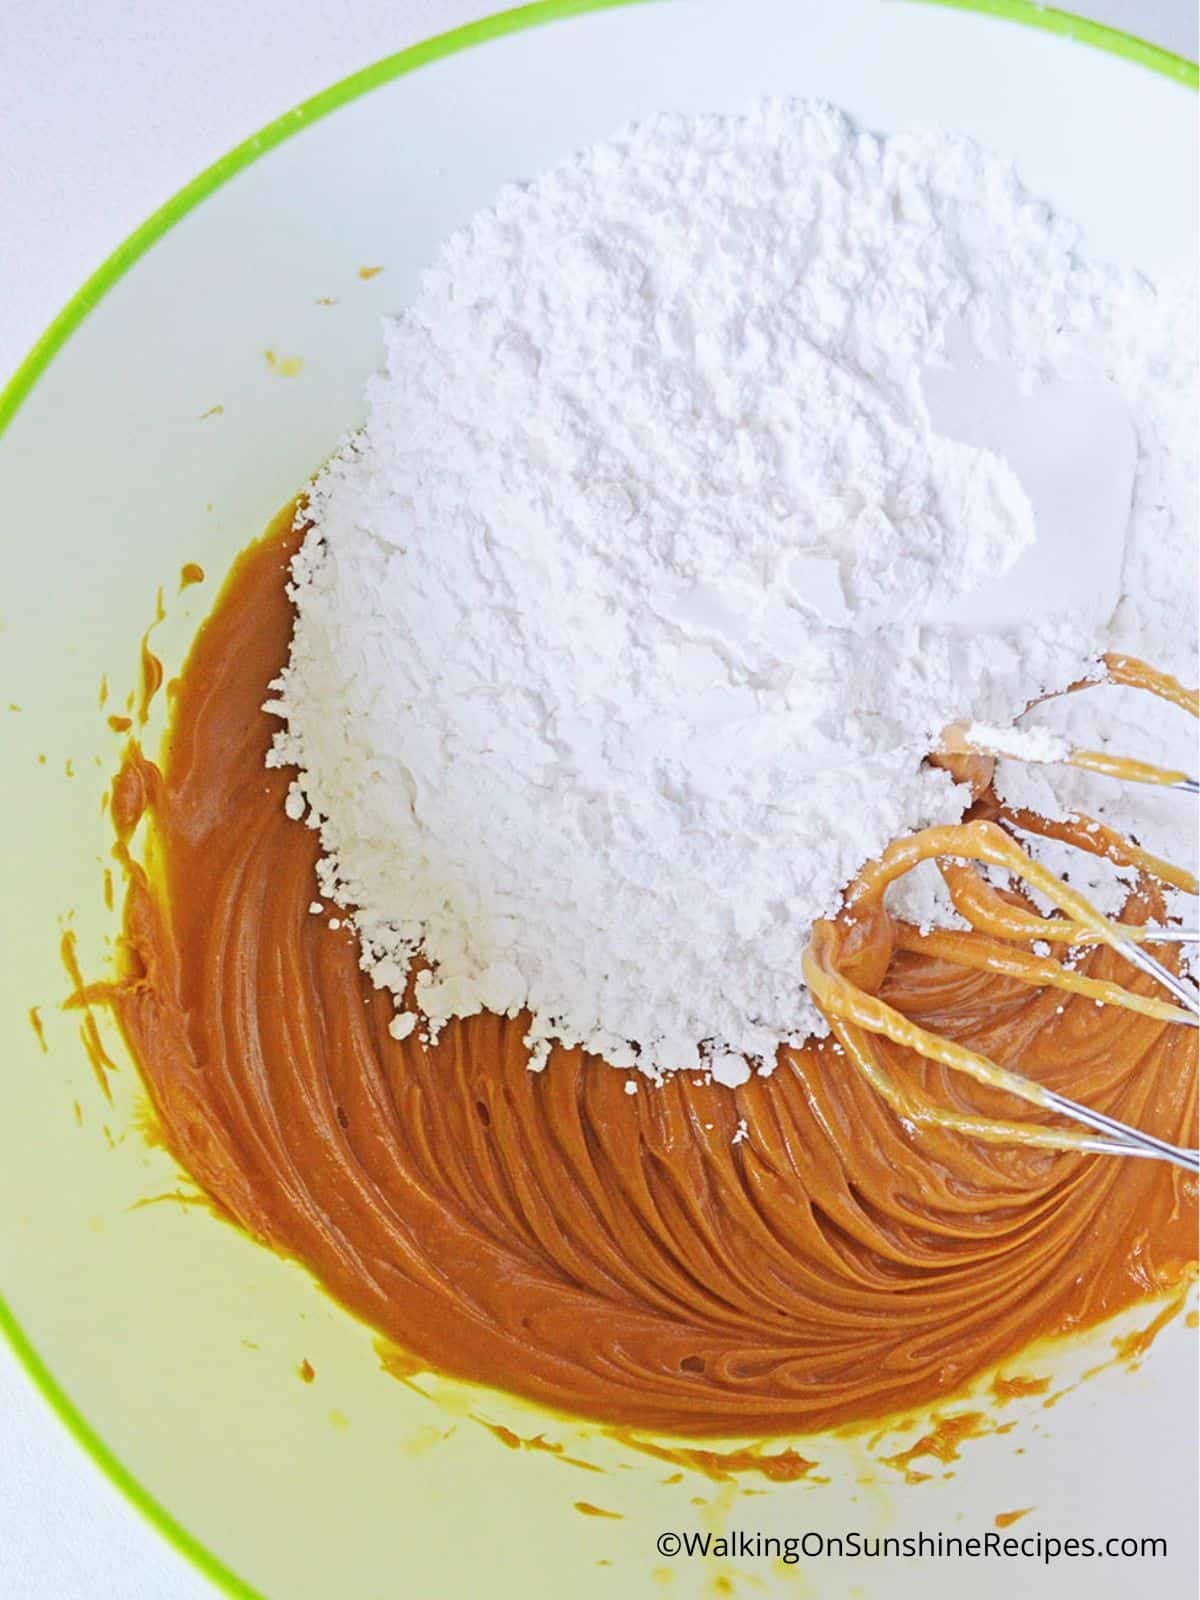 Peanut butter mixture with powdered sugar.